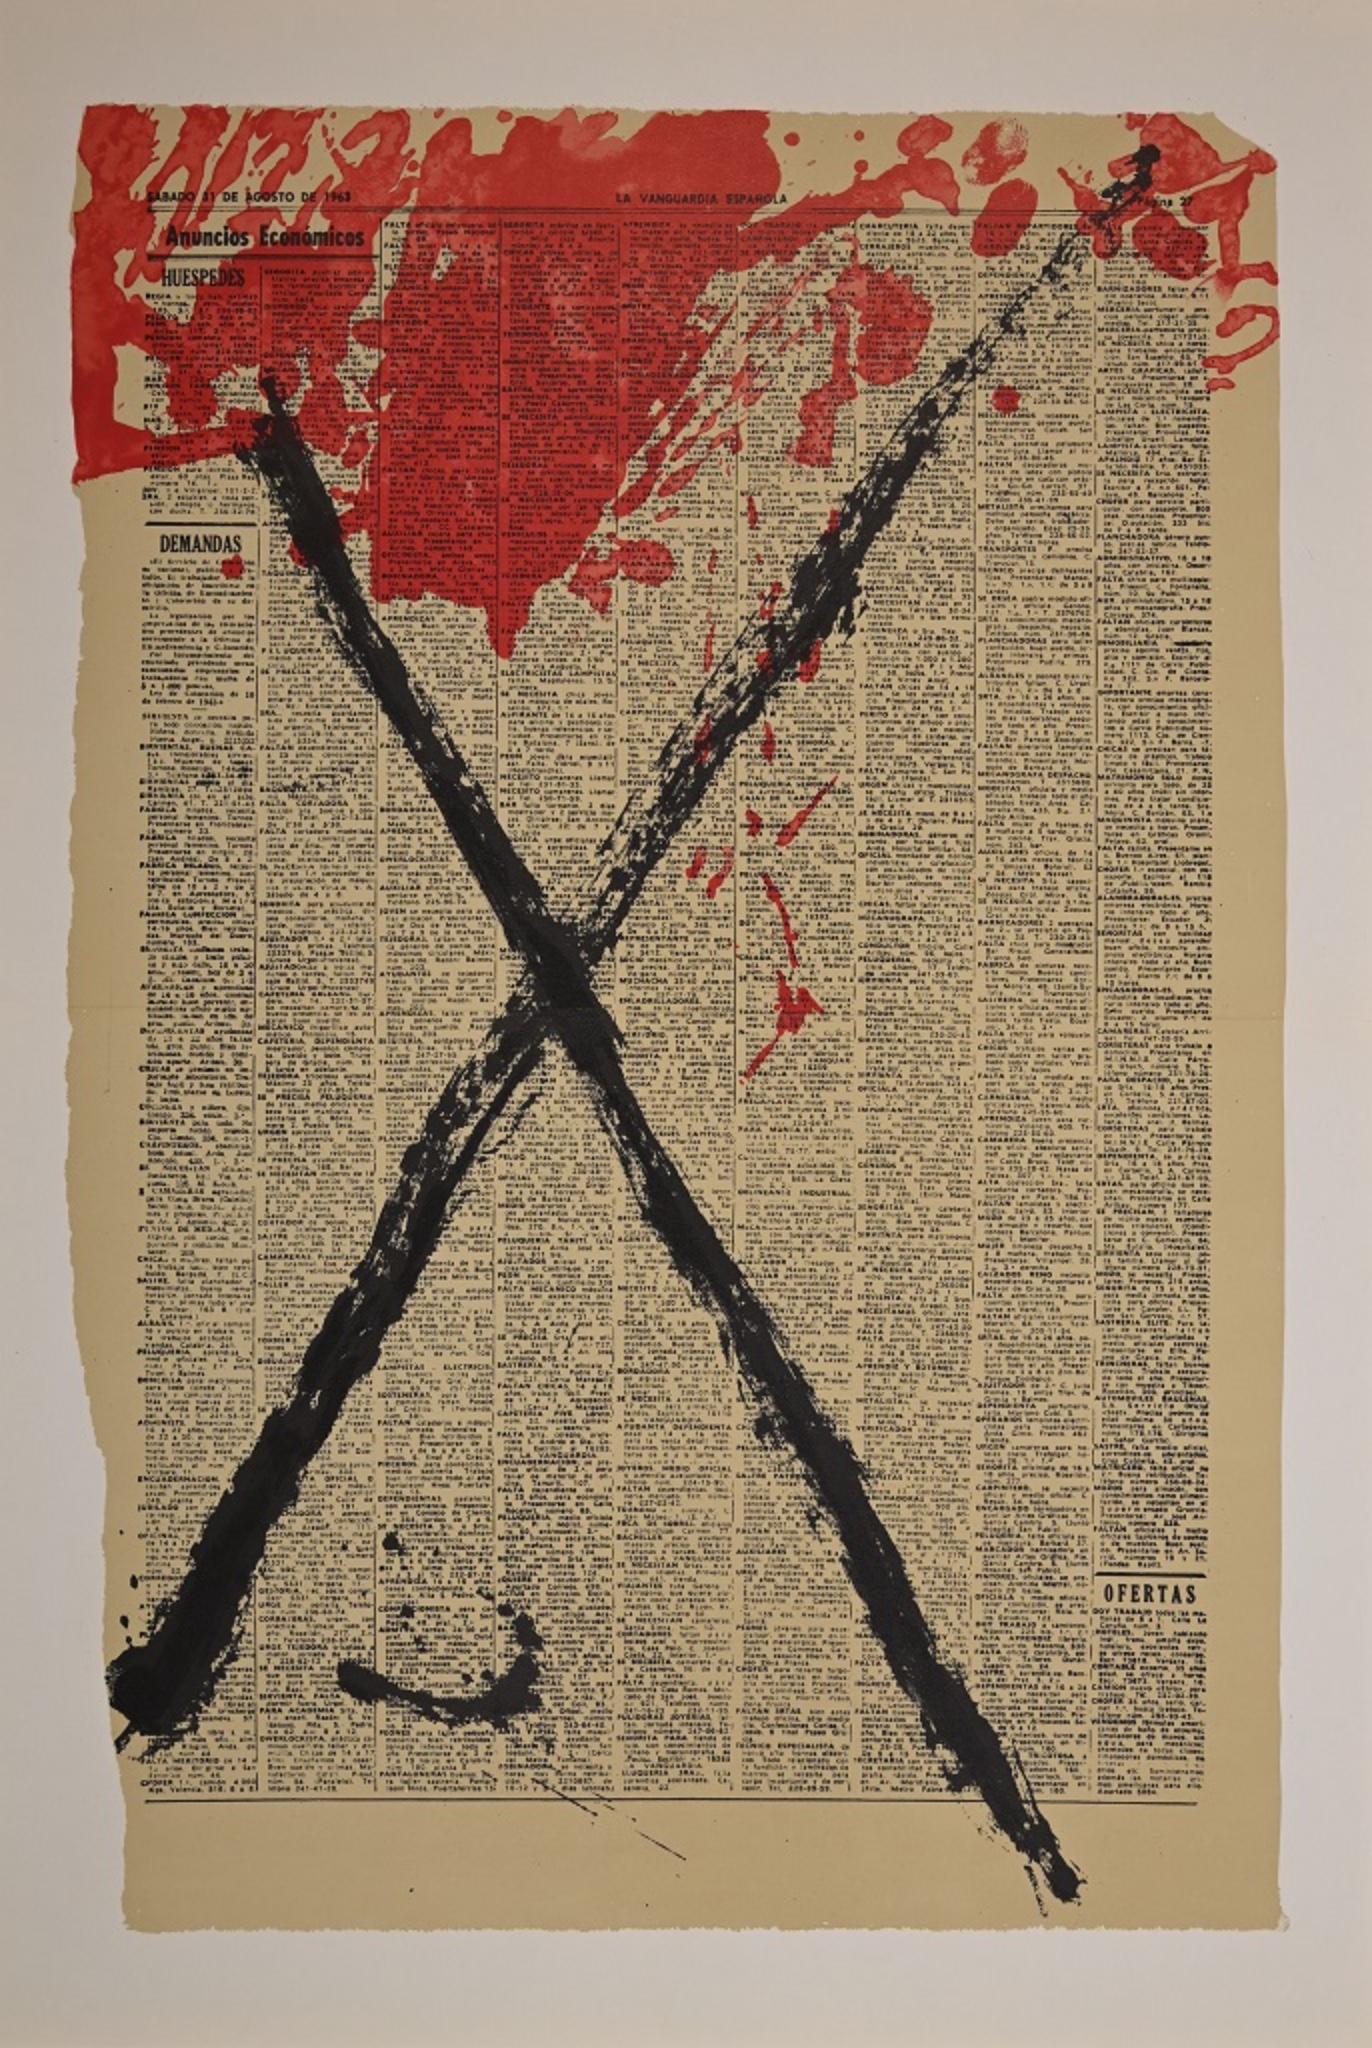 Cross is a mixed lithograph realized by Antoni Tàpies for the Art Magazine Derrière Le Miroir no 175. 

Printed by Ateliers de Maeght, Paris, 1968.

Good conditions except for a light fold in the center as for the whole edition.
